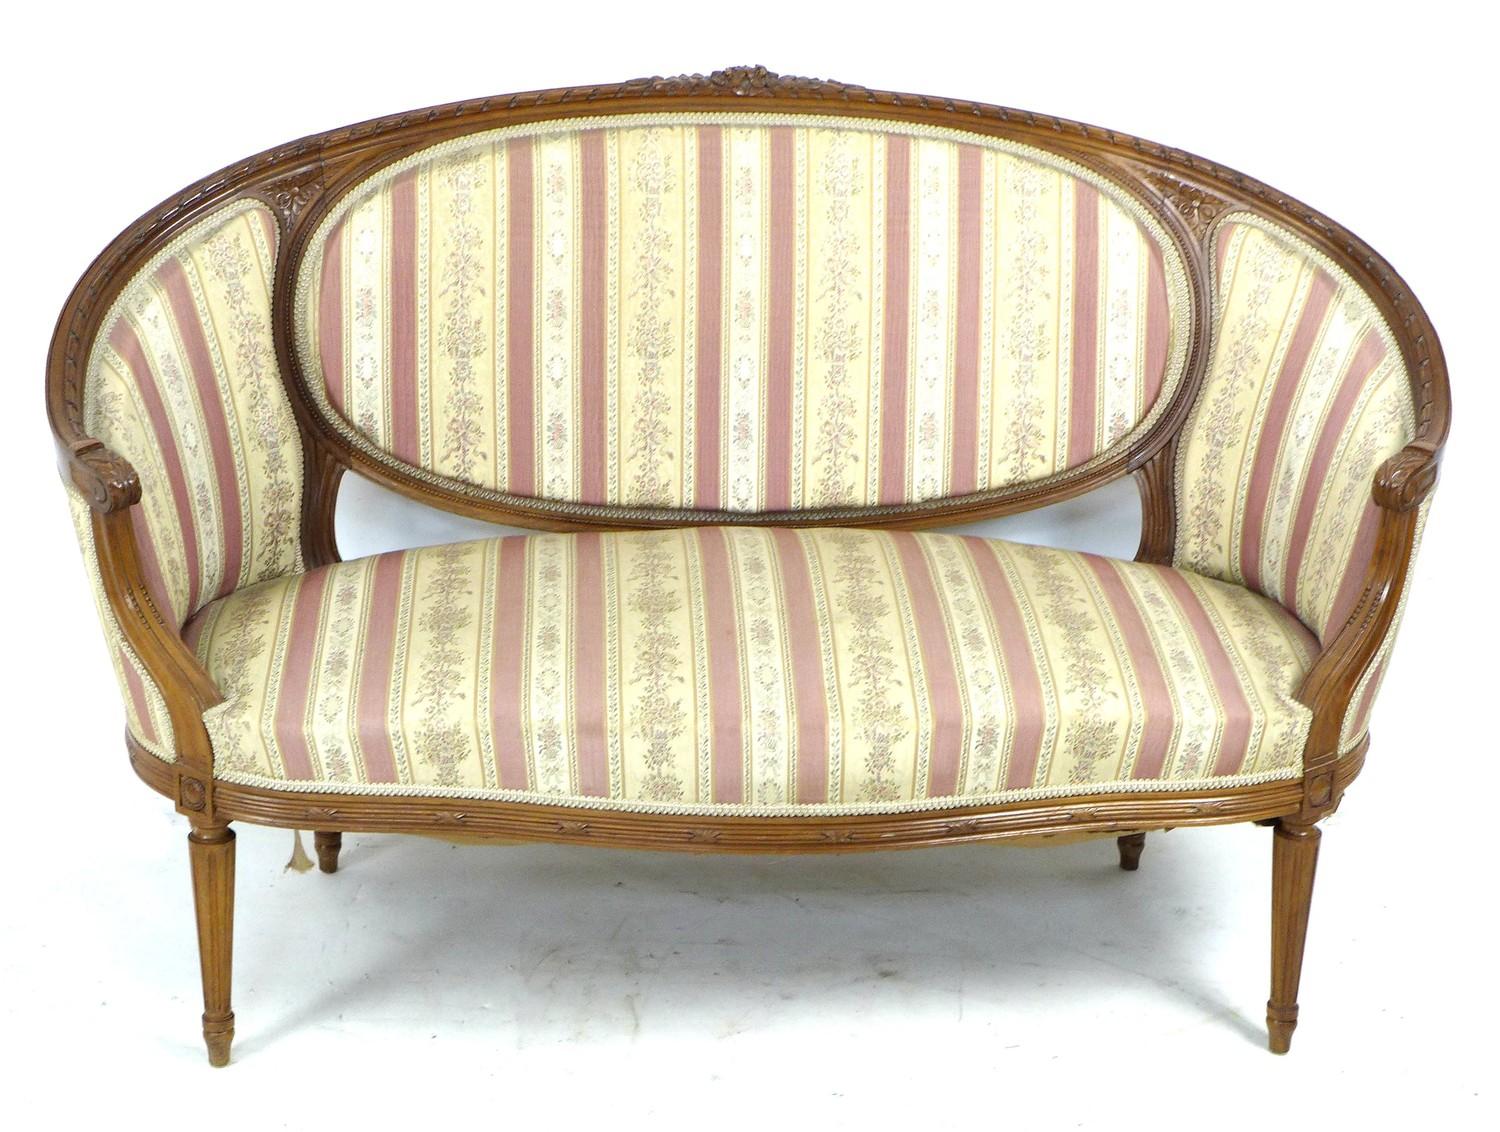 A French two seater settee, mid 20th century in Louis XVI style, with curved back with integral